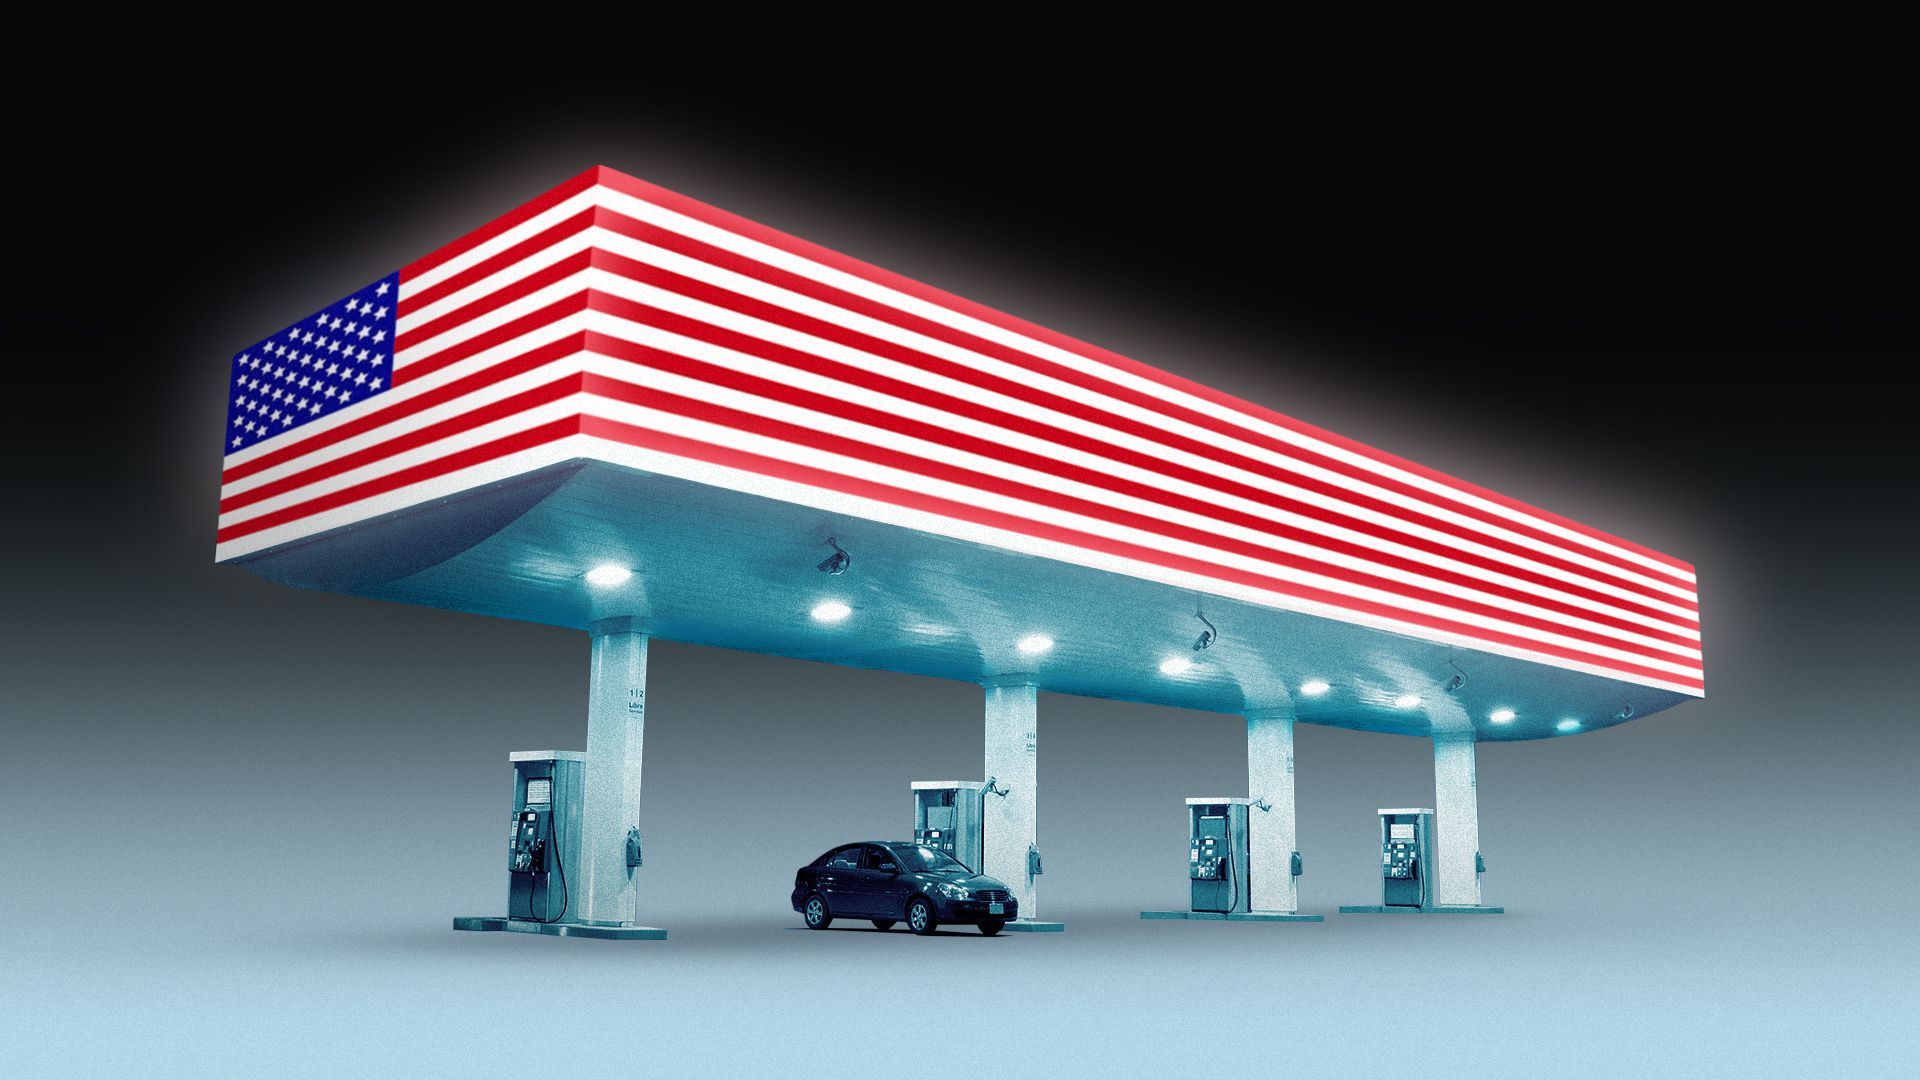 Illustration of a gas station with a roof resembling the US flag